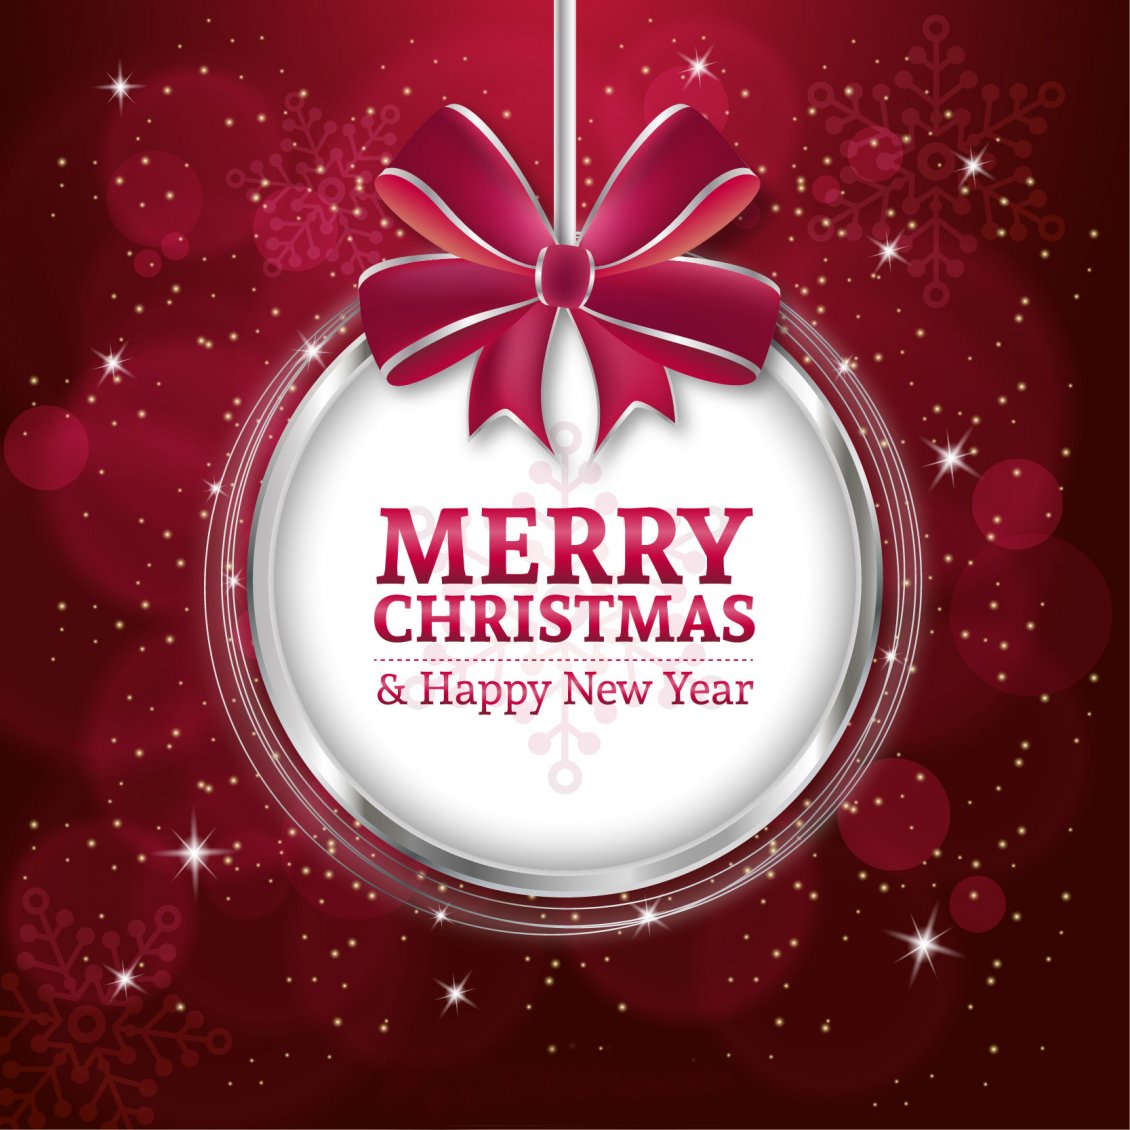 Download Wallpaper Wonderful red wallpaper - Merry Christmas and Happy New Year